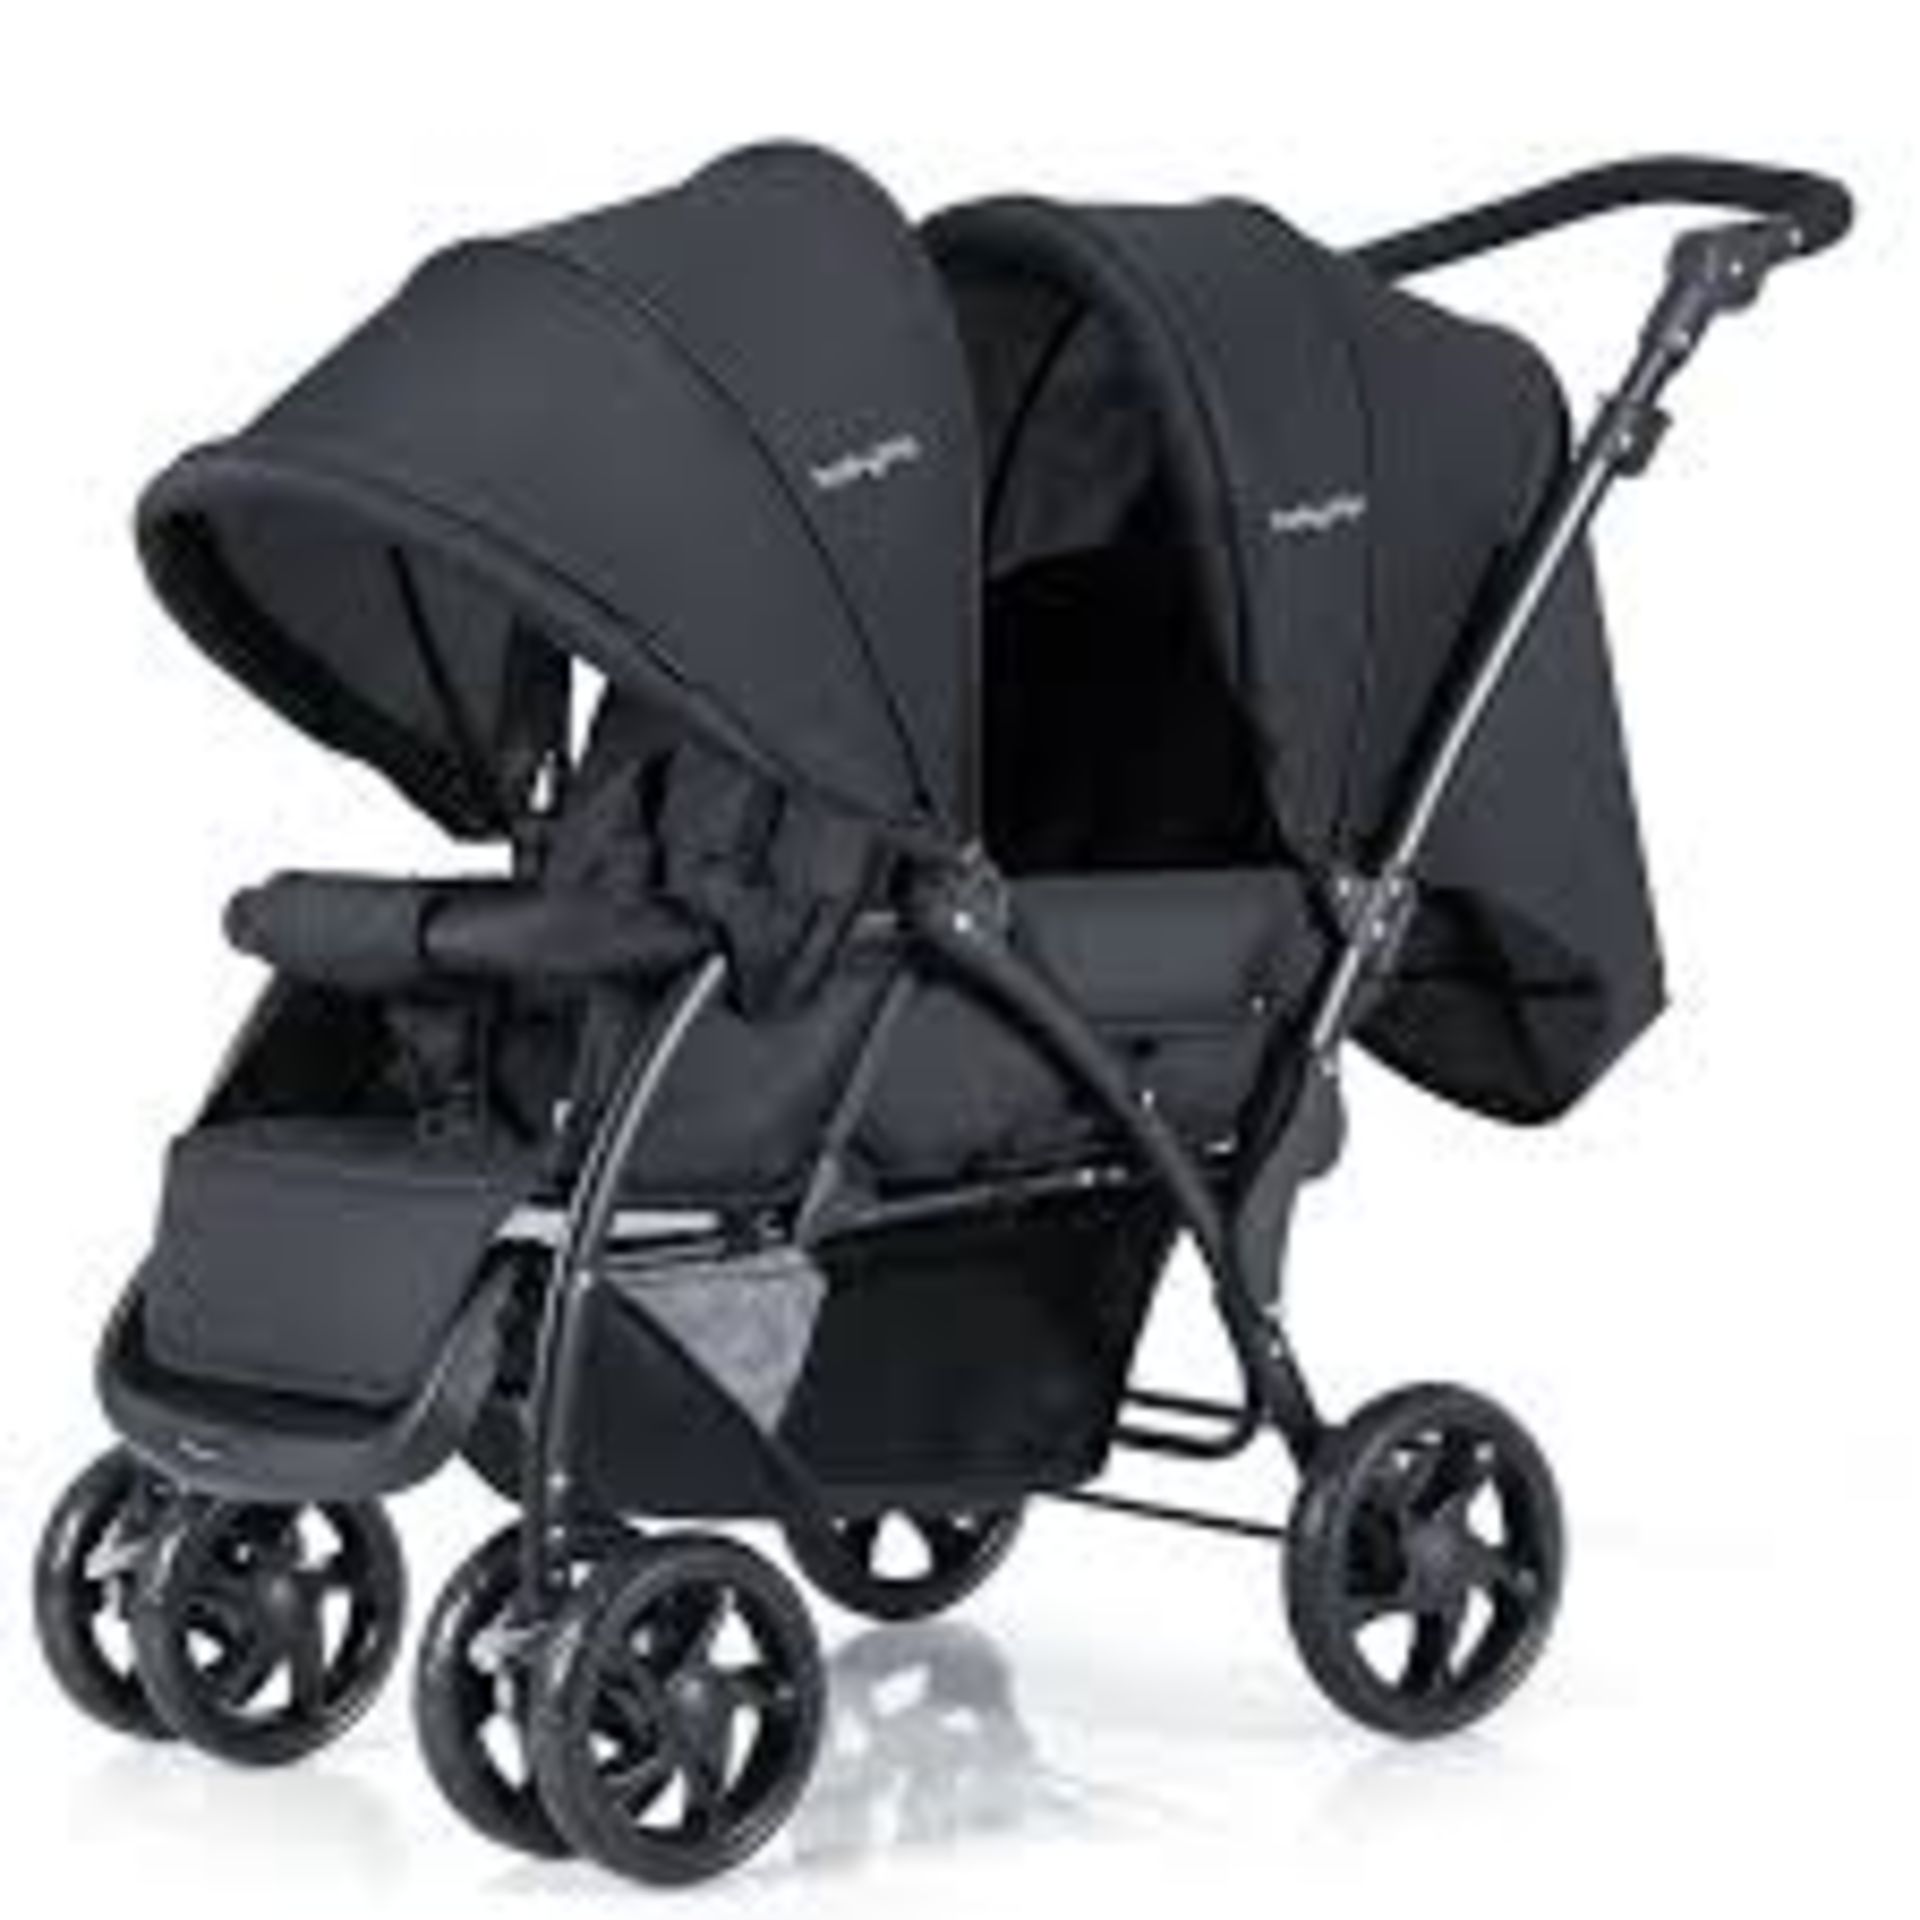 Double Pushchair with Adjustable Backrest and Sunshade-Black. - R14.15.